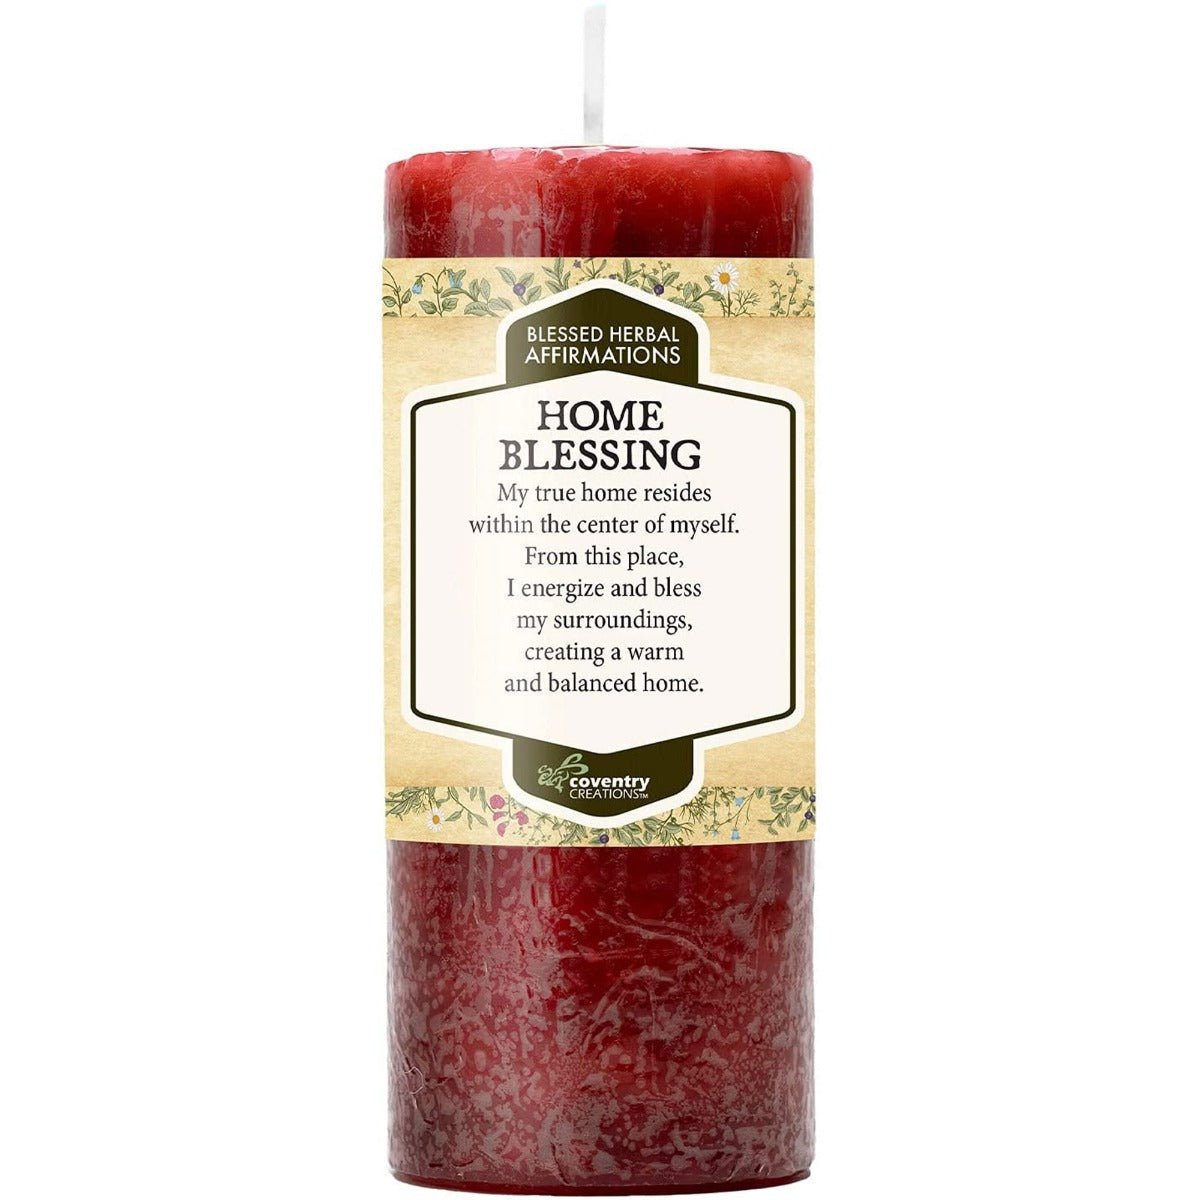 Home Blessing Affirmation Candle - 13 Moons